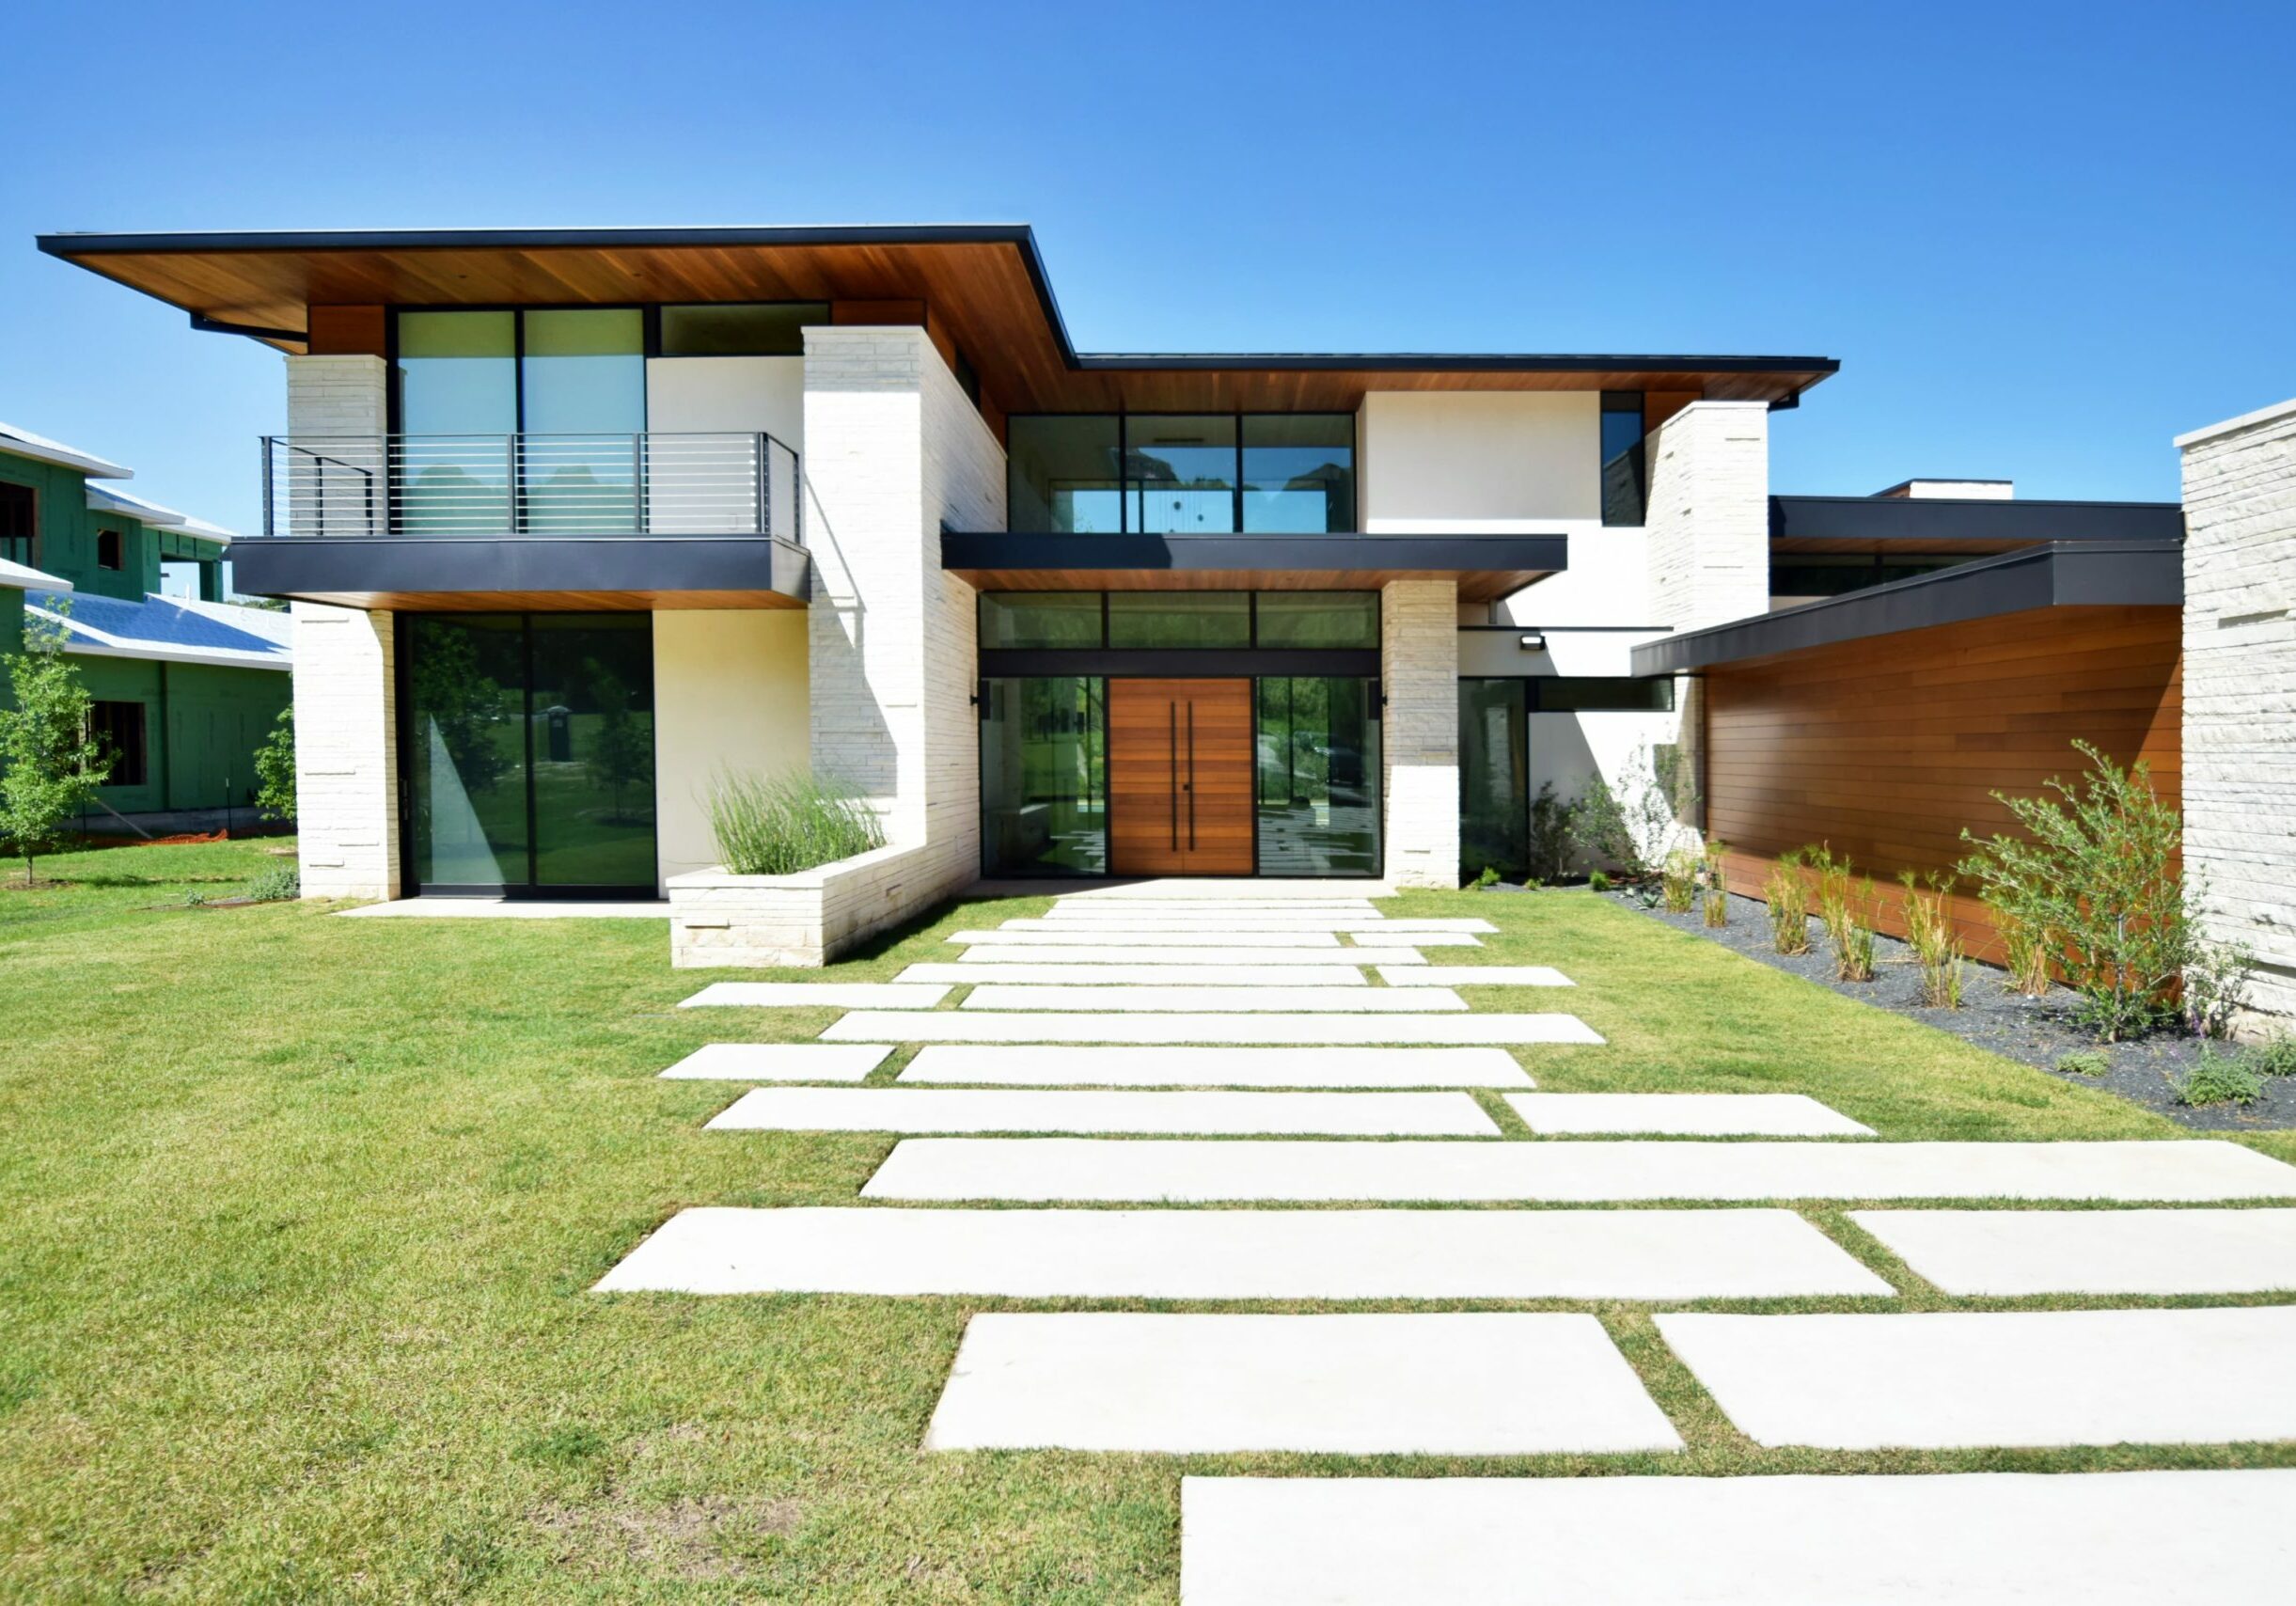 Exterior view of modern home designed by Jay Corder Architect